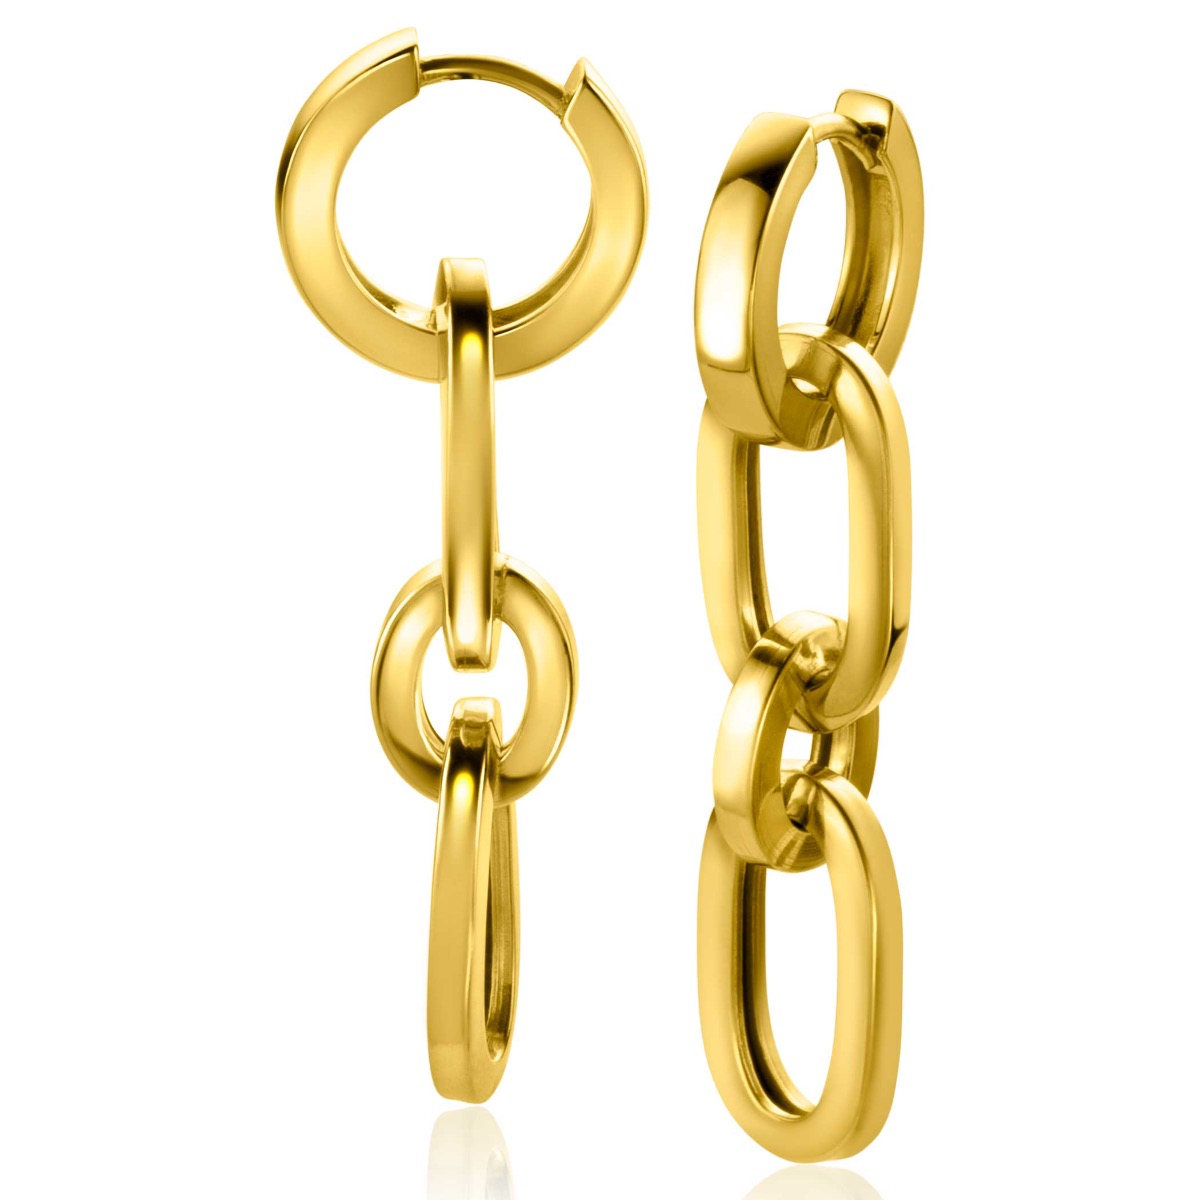 35mm ZINZI Gold Plated Sterling Silver Earrings Pendants 3 Paperclip Chains ZICH2351G (excl. hoop earrings)